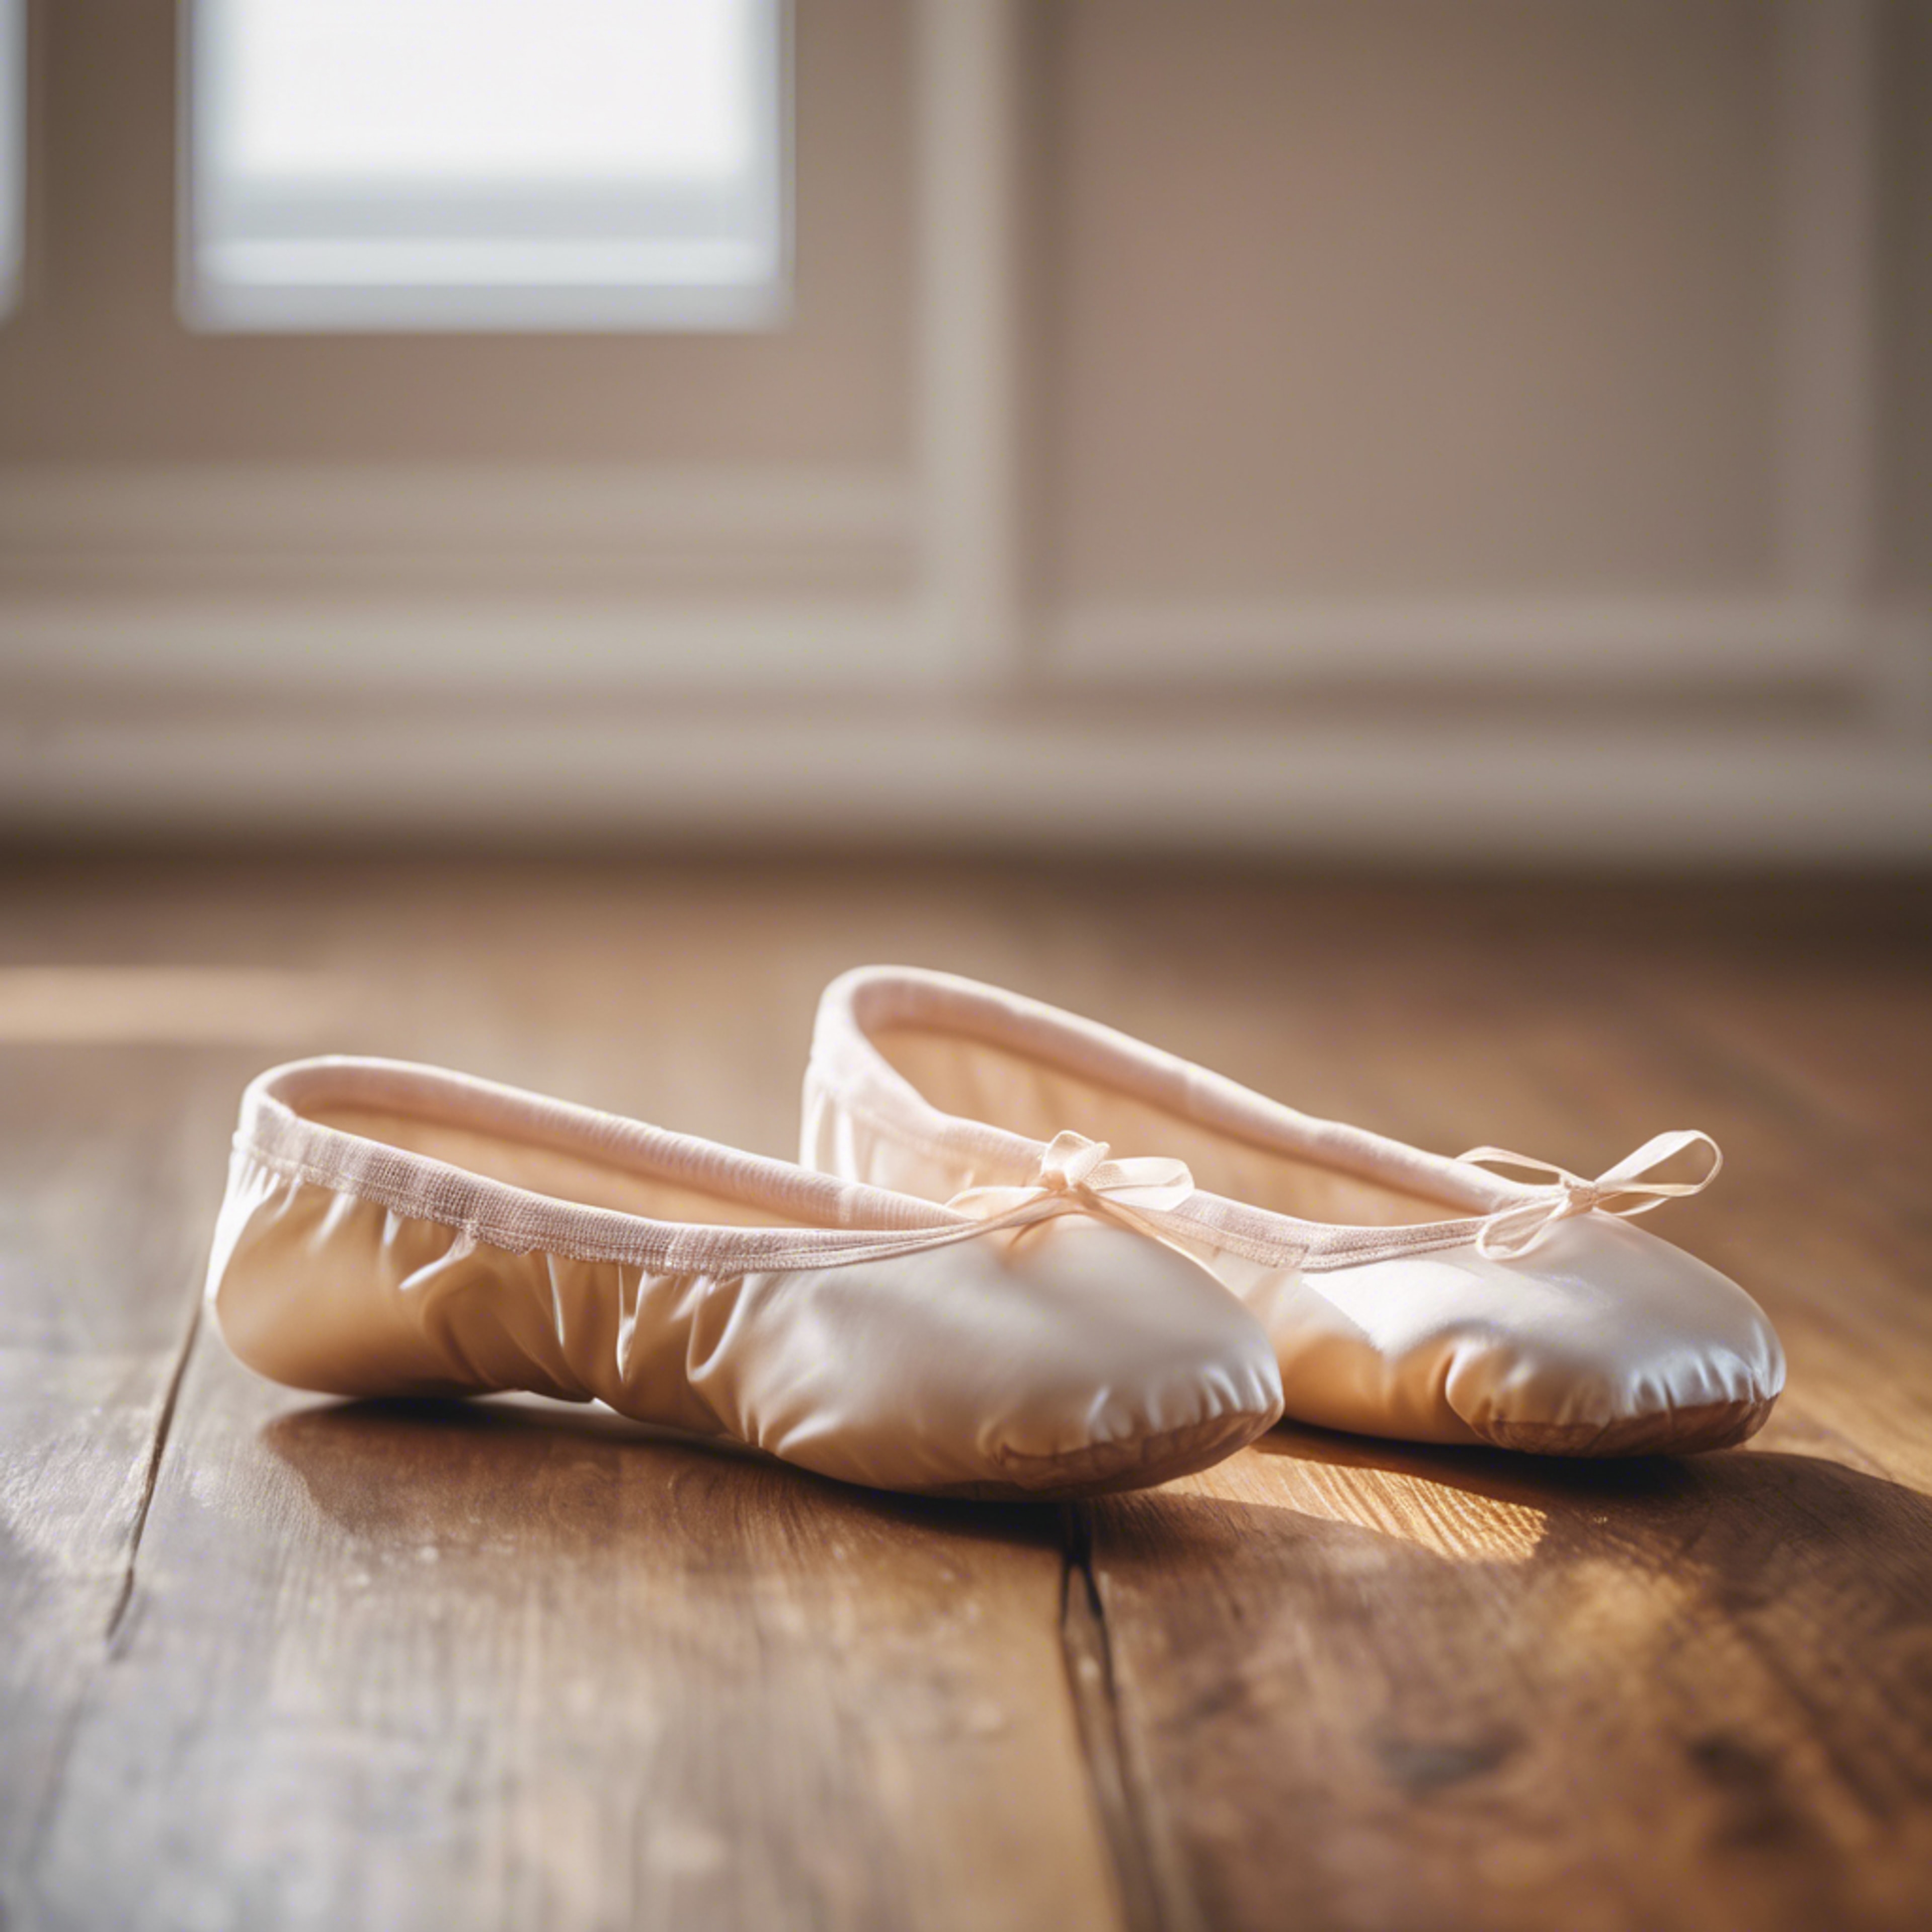 Close up of a pair of cream-colored ballet slippers on a hardwood floor. טפט[4efd7208256149a9b923]